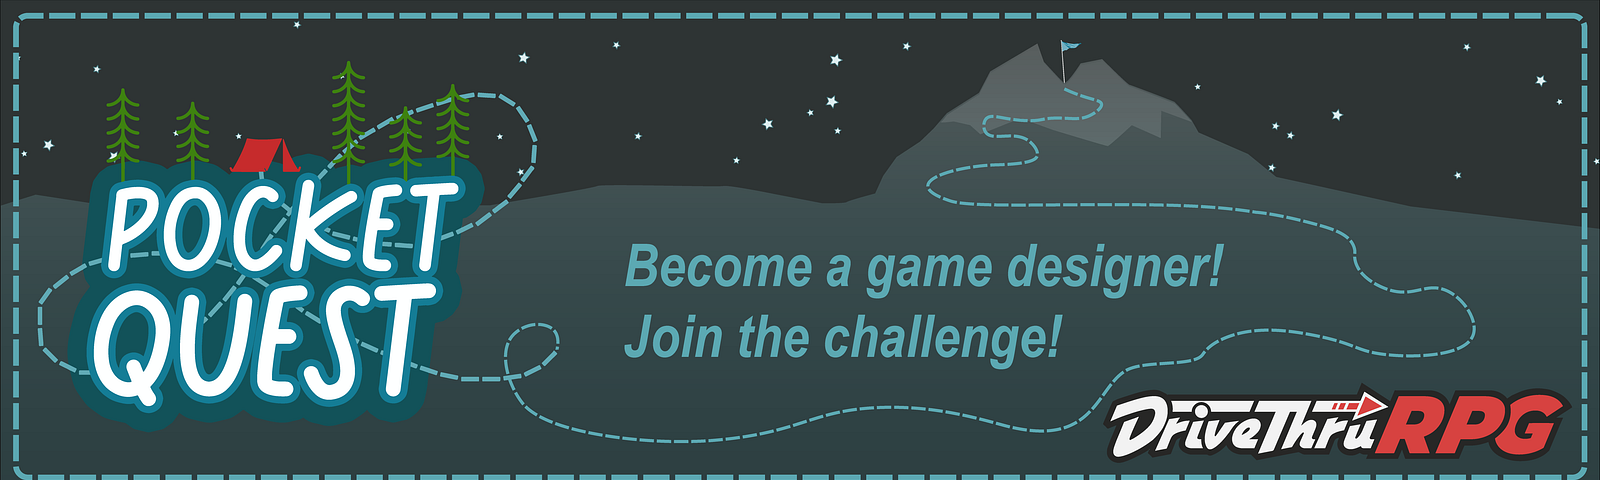 PocketQuest — Become a game designer! Join the challenge!